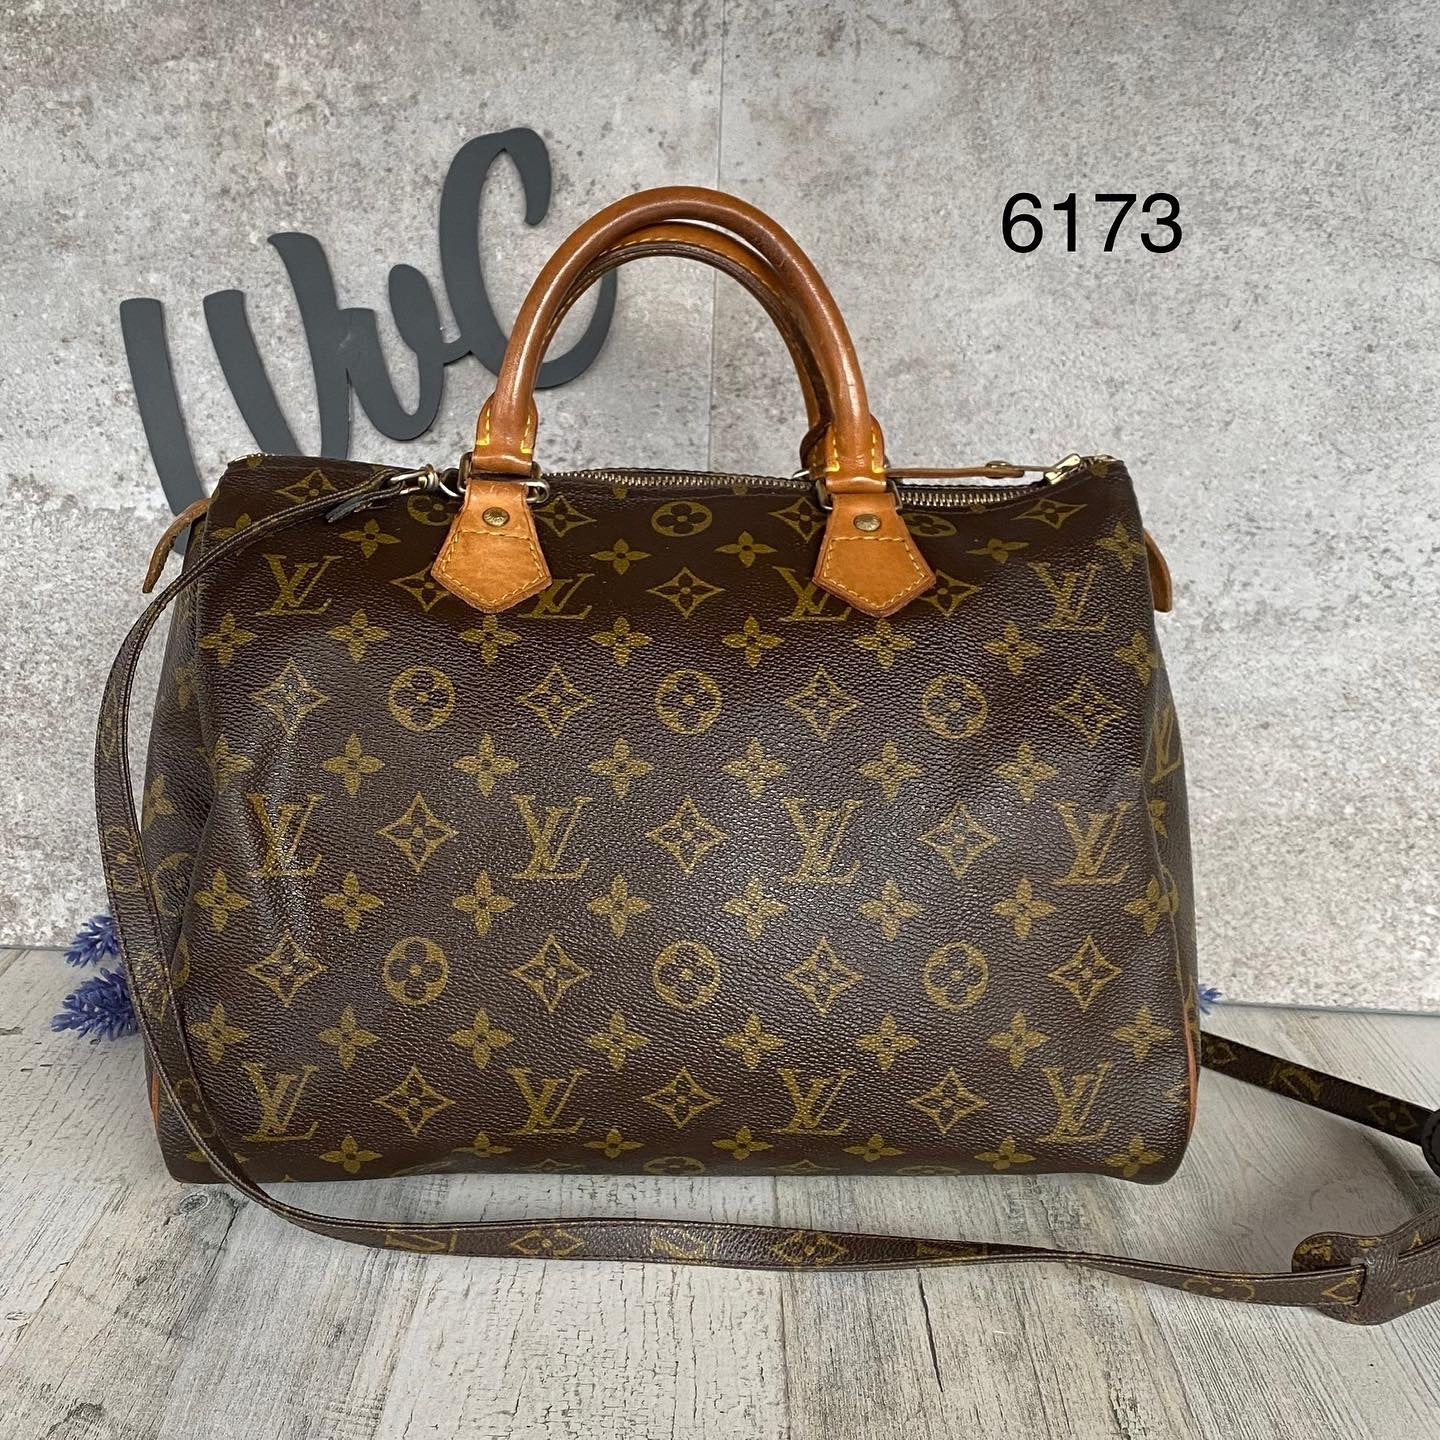 SOLD ❌ Brand : Louis Vuitton, Speedy 30 Material: Genuine Leather Size :  Medium Suitable: Office, Outing, Safari